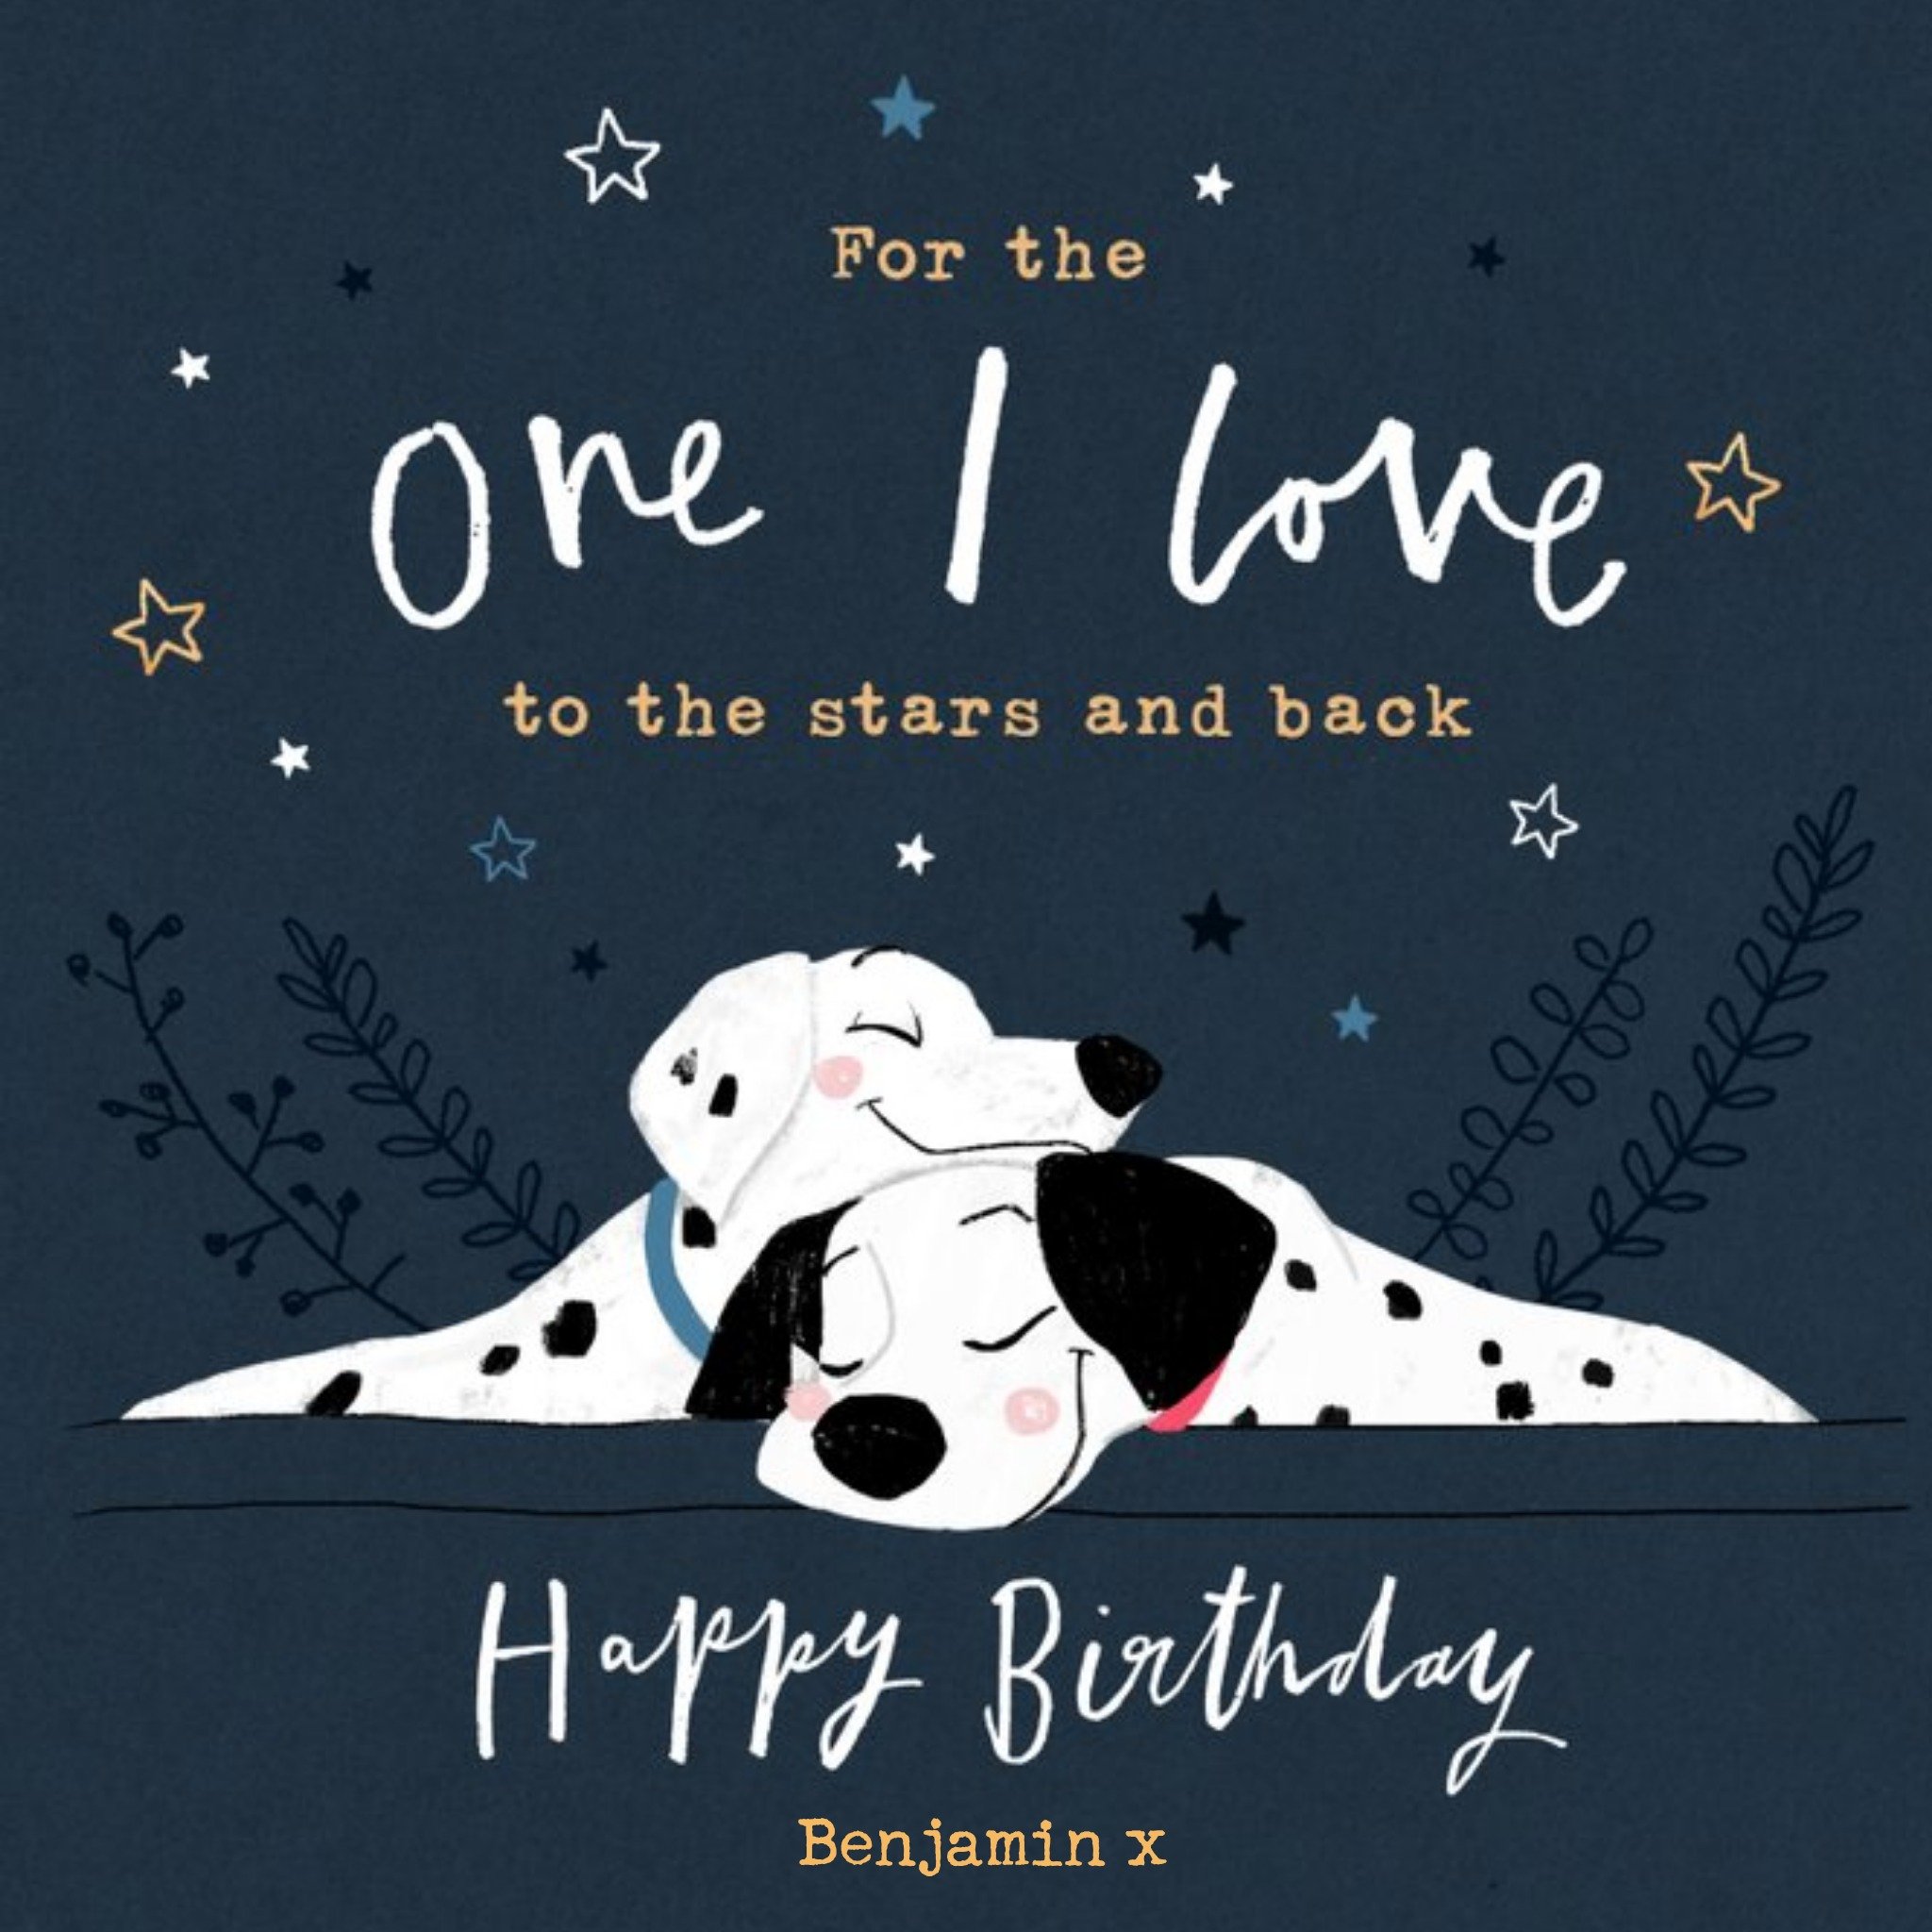 For The One I Love To The Stars And Back - Disney 101 Dalmatians Illustrated Birthday Card, Square